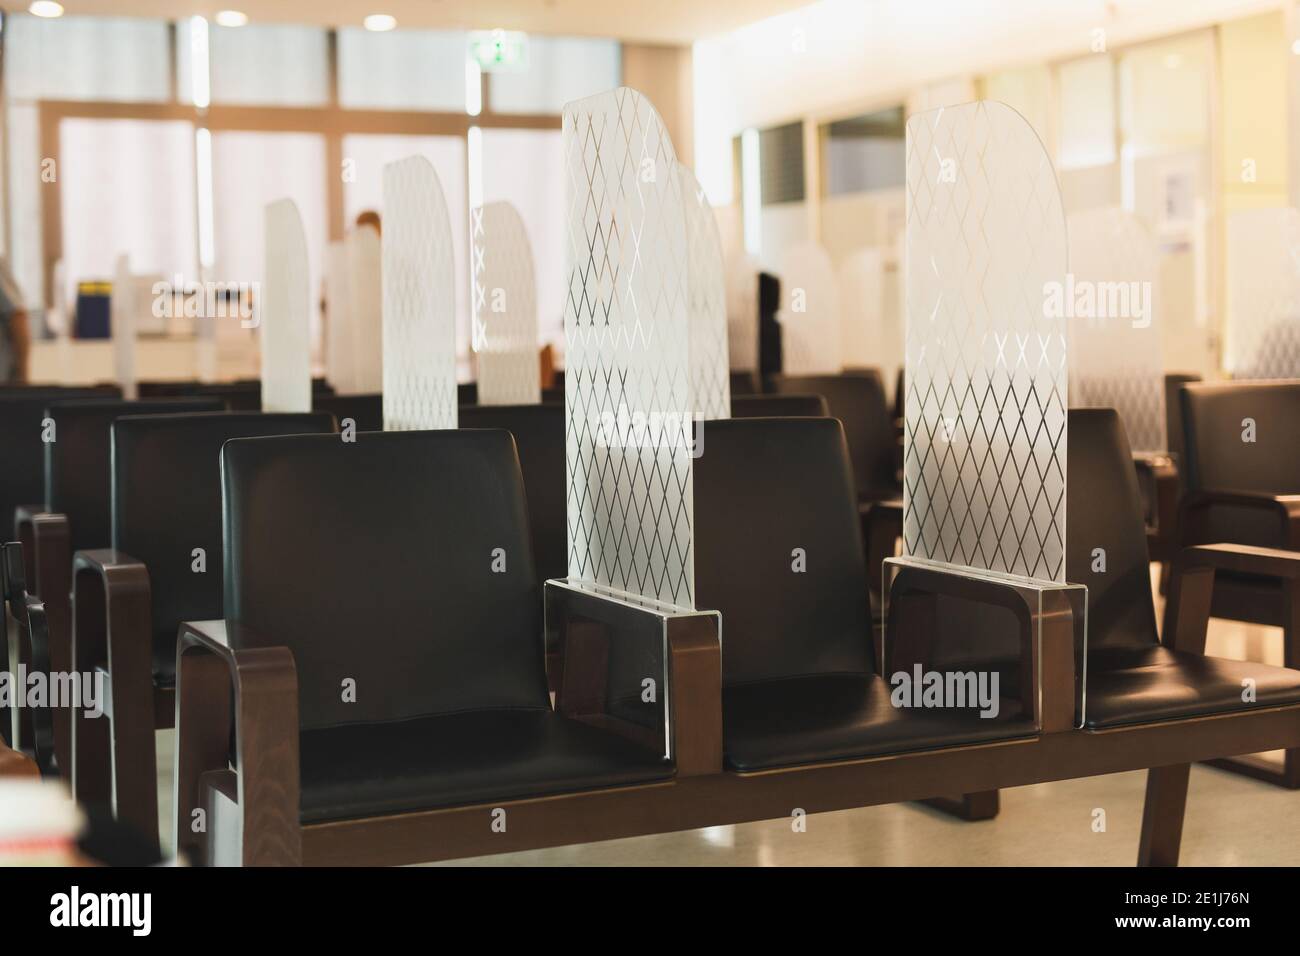 Social Distancing chair with Acrylic partition in waiting room during covid-19. Stock Photo